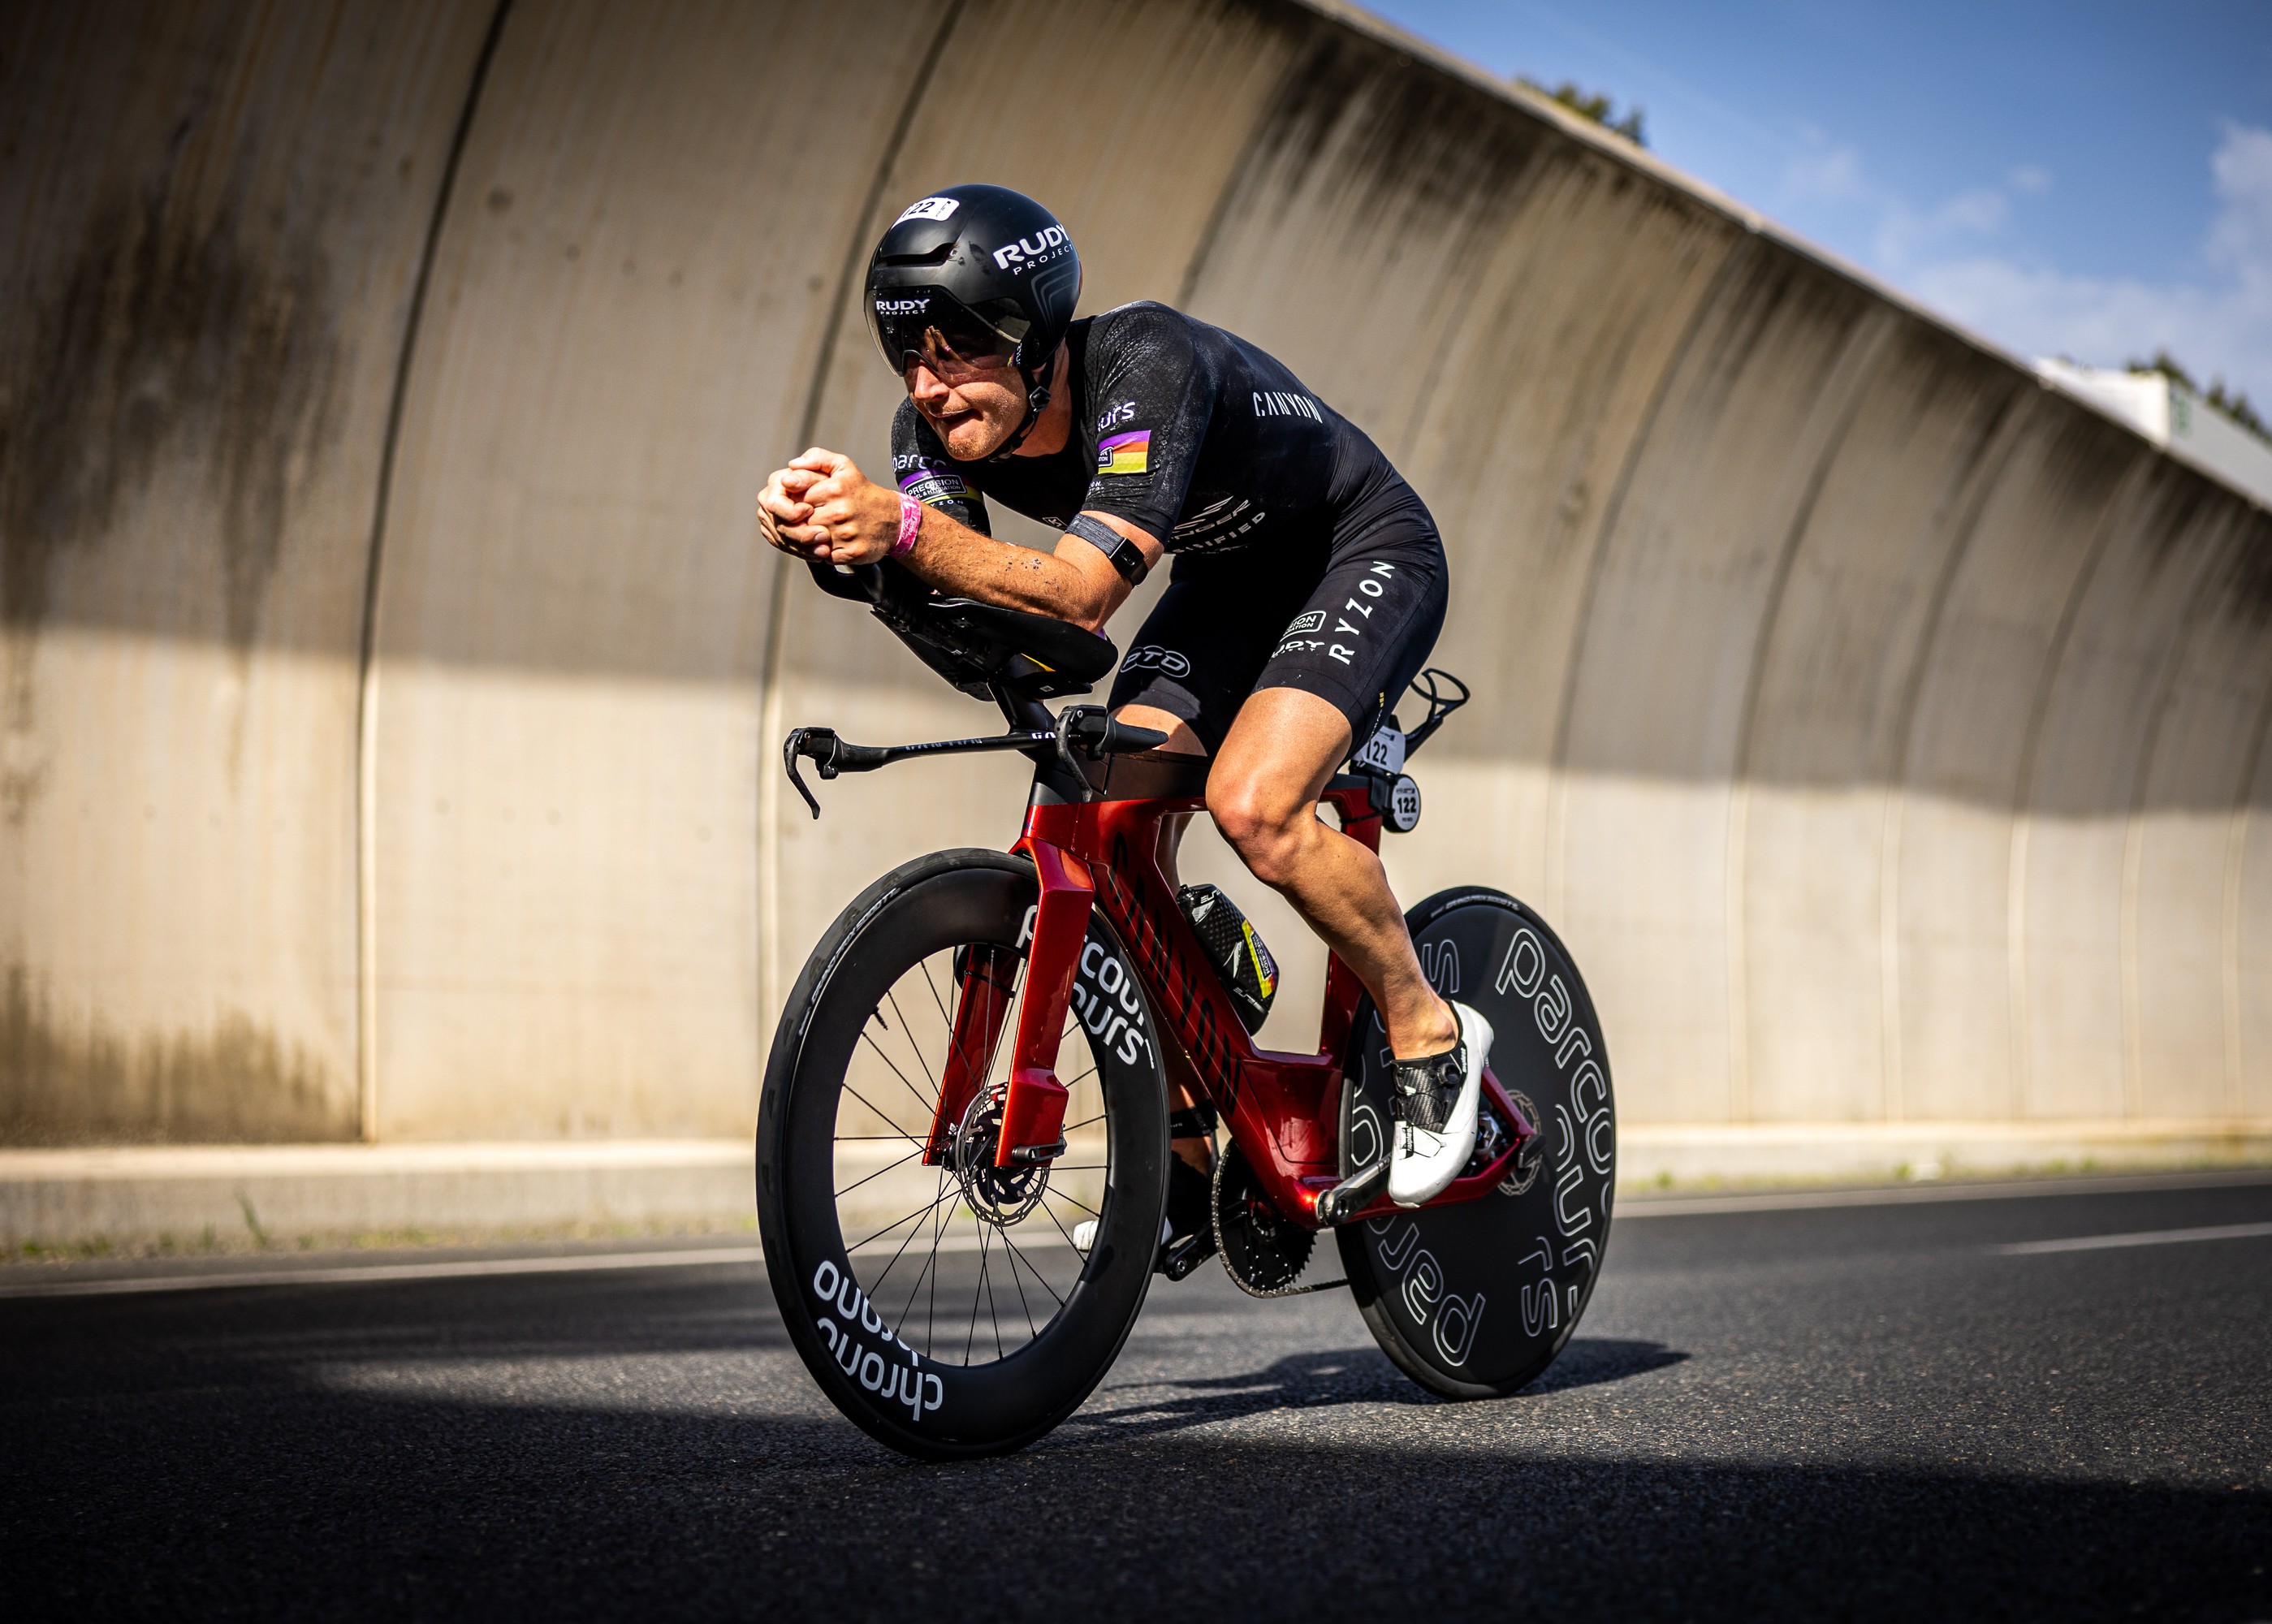 Kyle Smith racing classified in professional triathlon